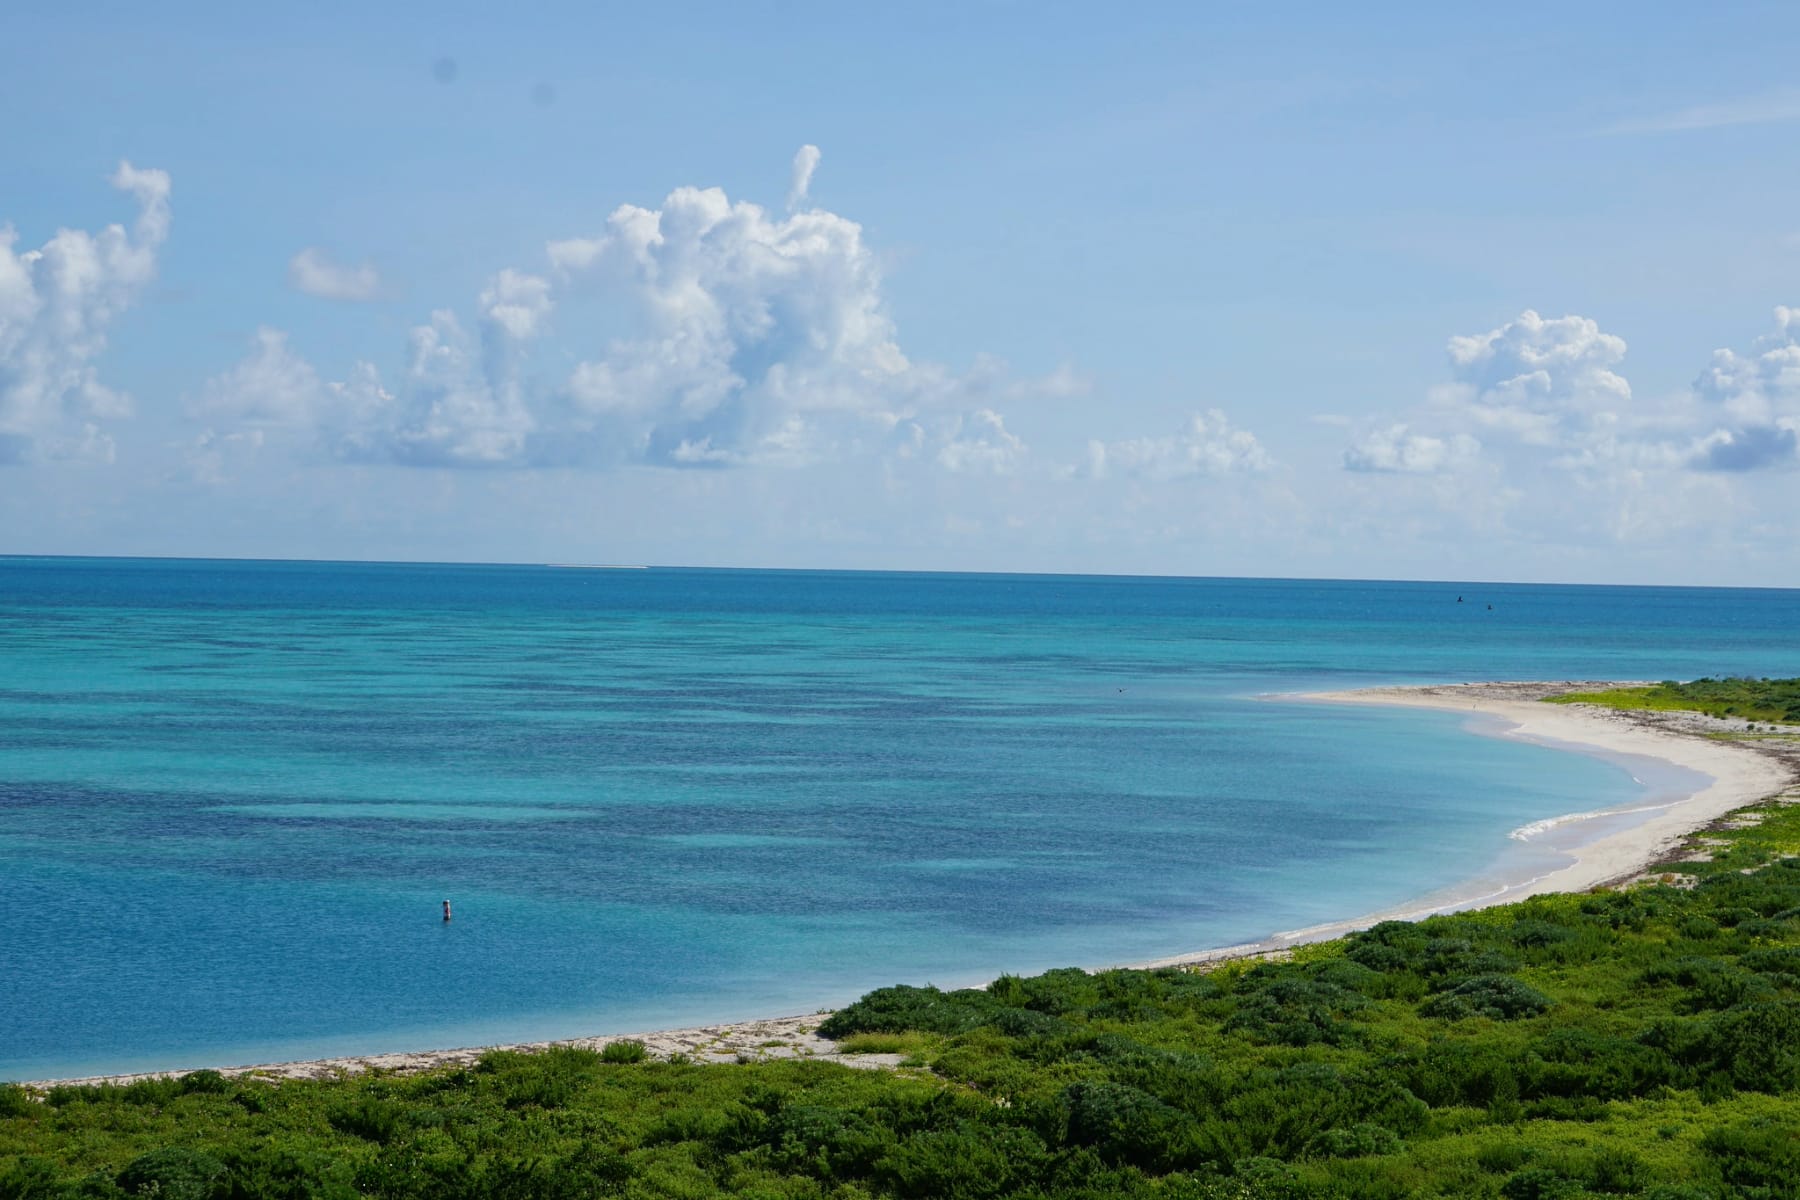 Walking around Bush Key is one of the best things to do in Dry Tortugas.